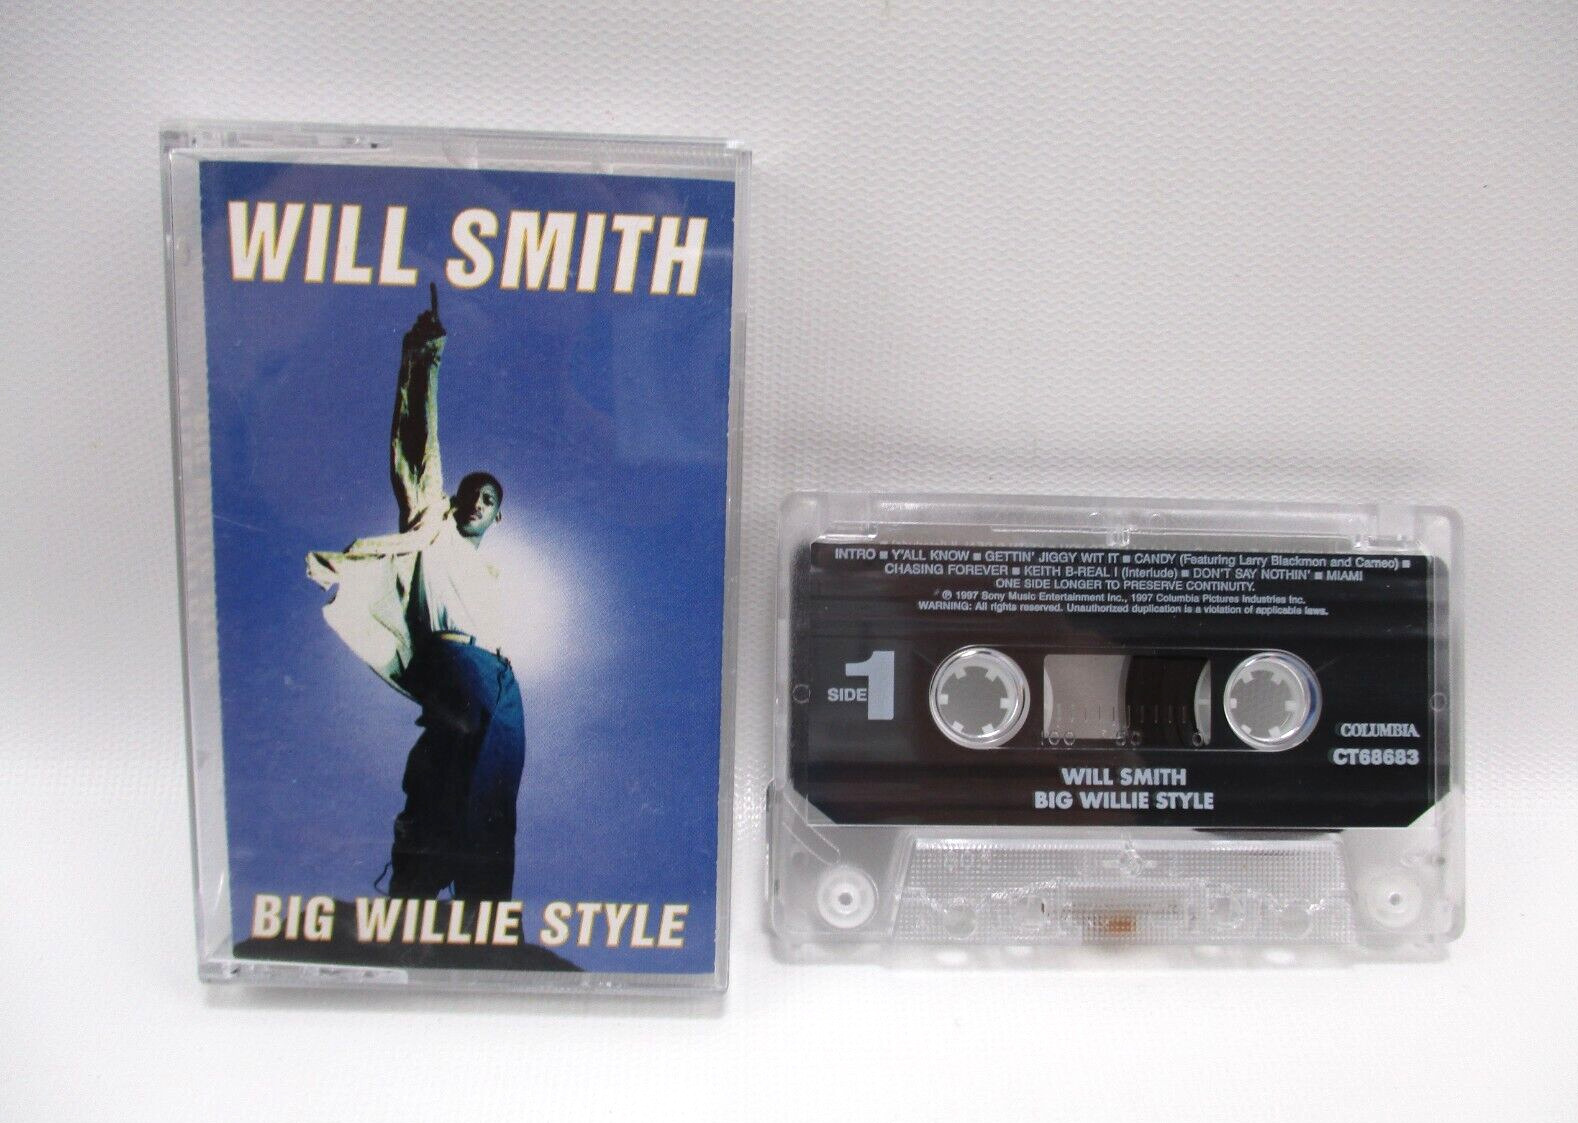 Will Smith Big Willie Style Cassette Tape 1997 Columbia 68683 Tested